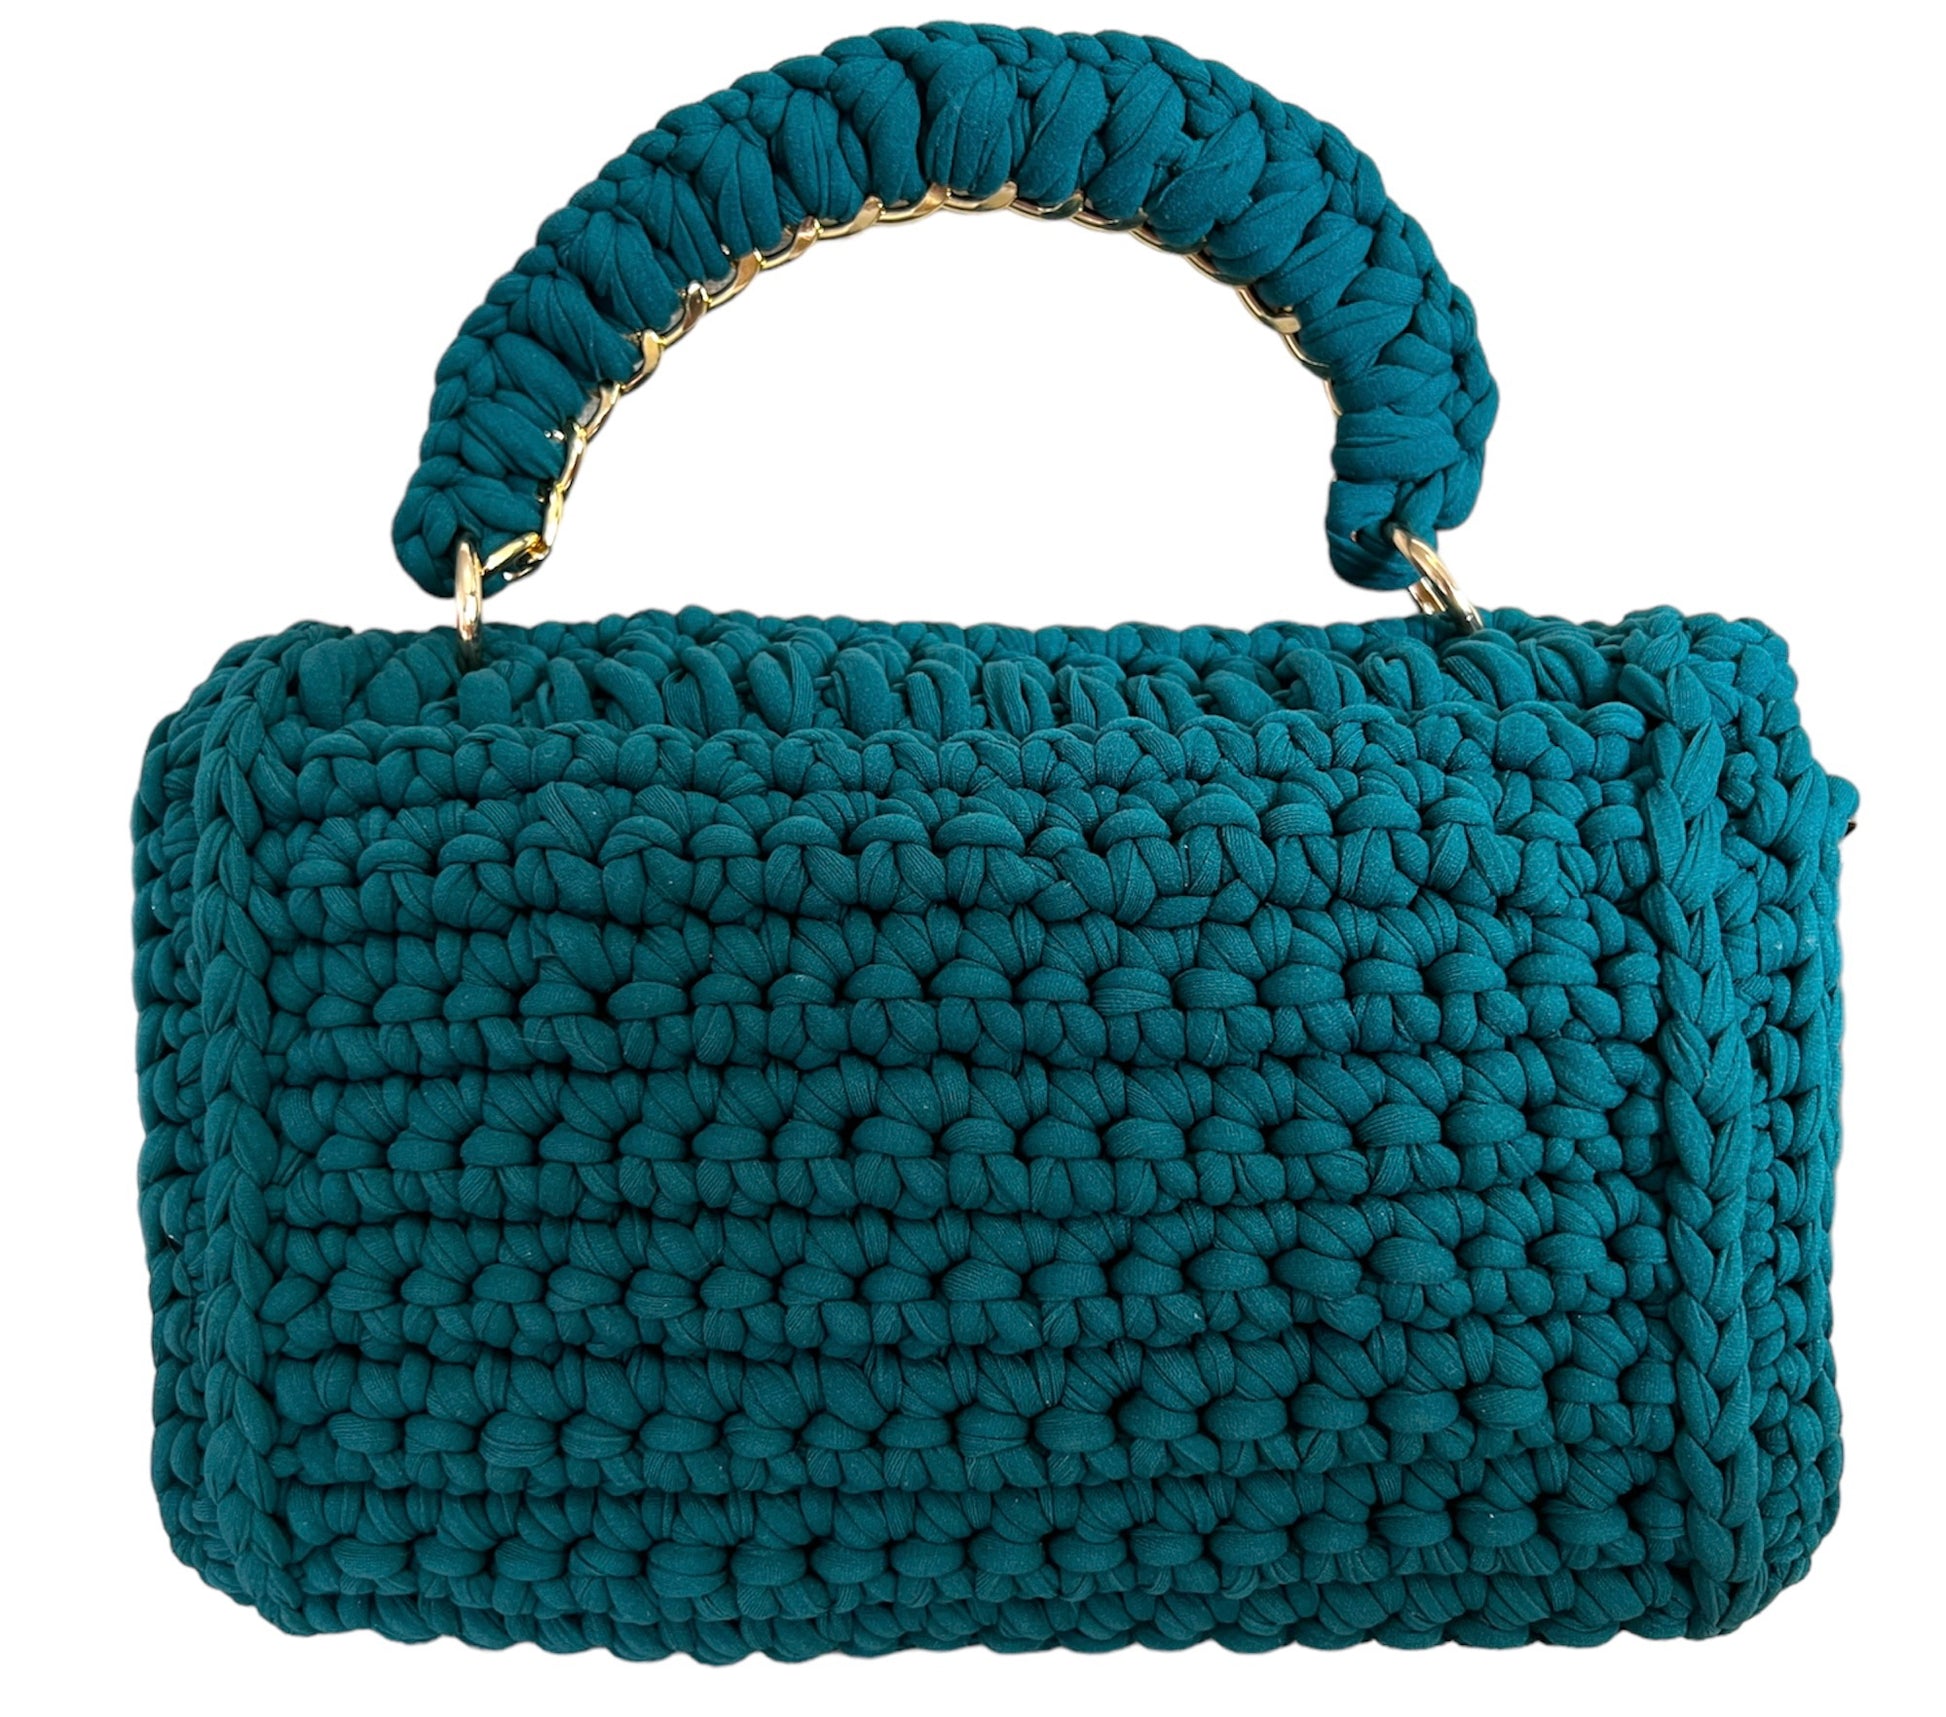 dark green luxury crochet bag with an exquisite design and a golden removable shoulder chain. The bag is a masterpiece of elegant craftsmanship, featuring meticulous crochet work that reflects a refined and sophisticated model. The versatile golden chain adds a touch of glamour, allowing for multiple styling options.